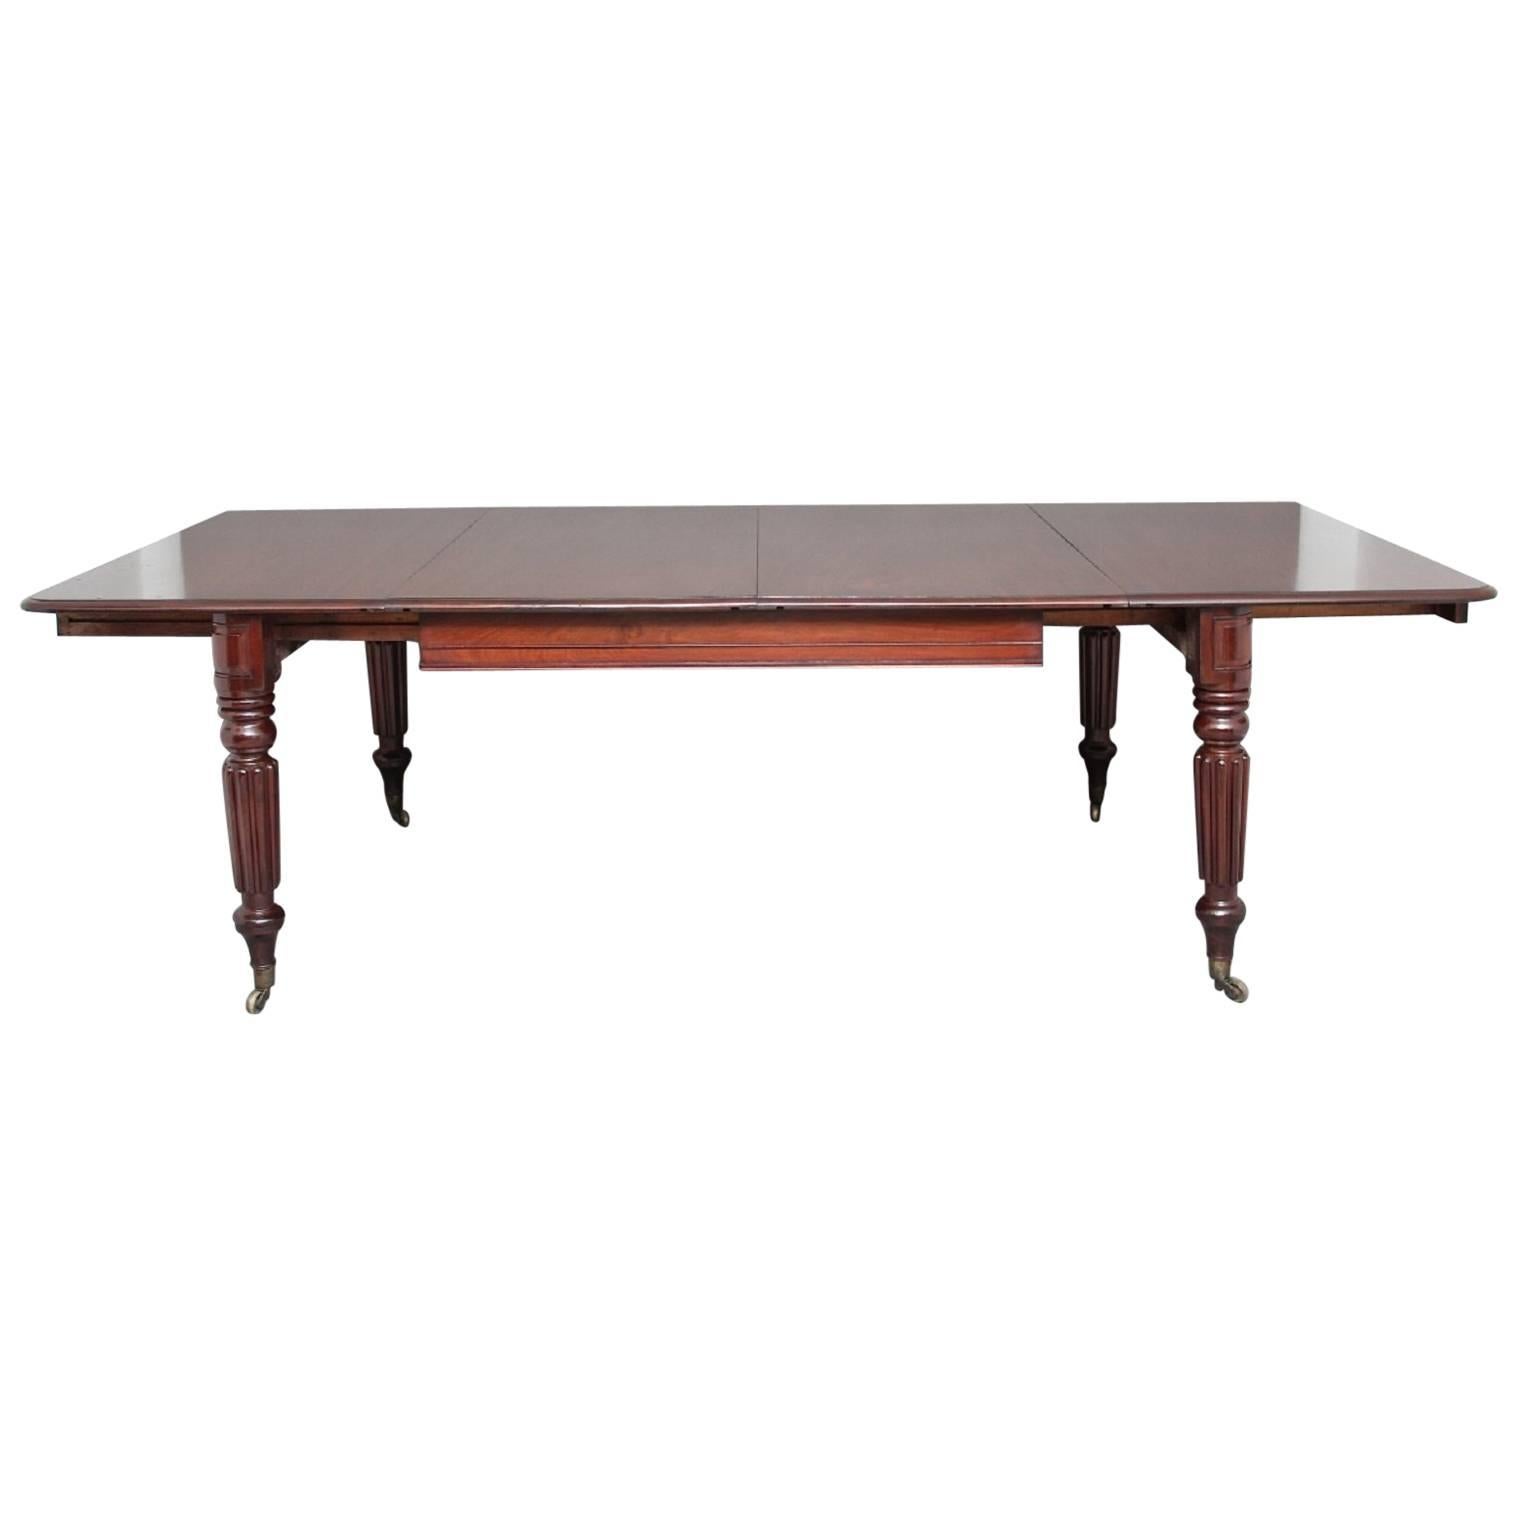 Early 19th Century Mahogany Two-Leaf Dining Table